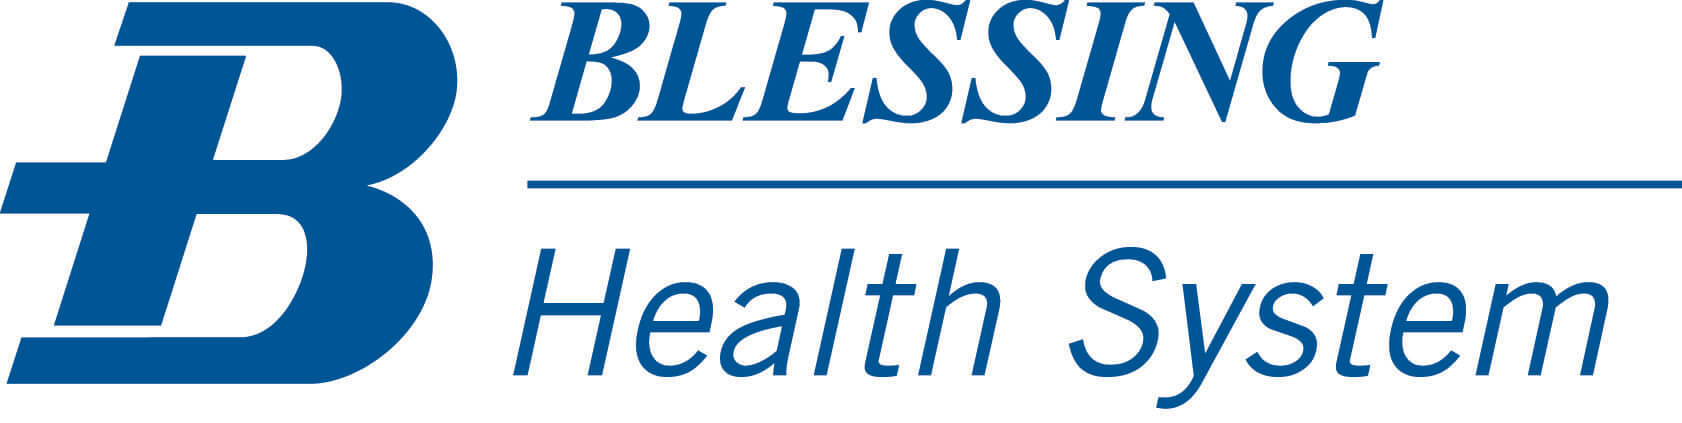 Blessing Health System - blue